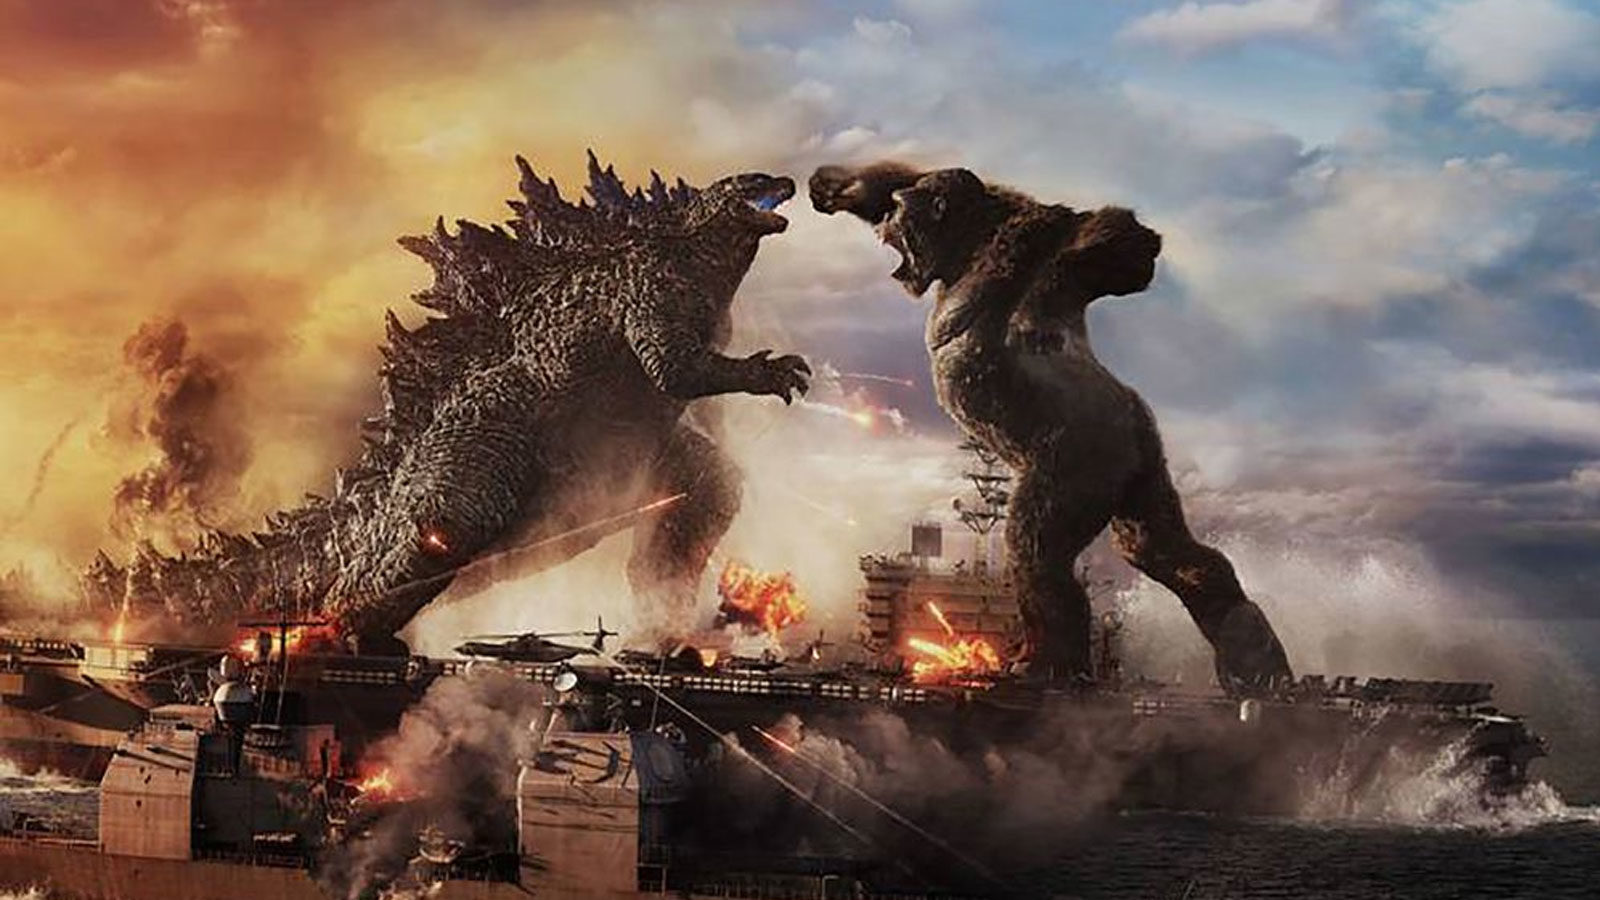 Godzilla and Kong Are Teaming Up In Their Next Movie